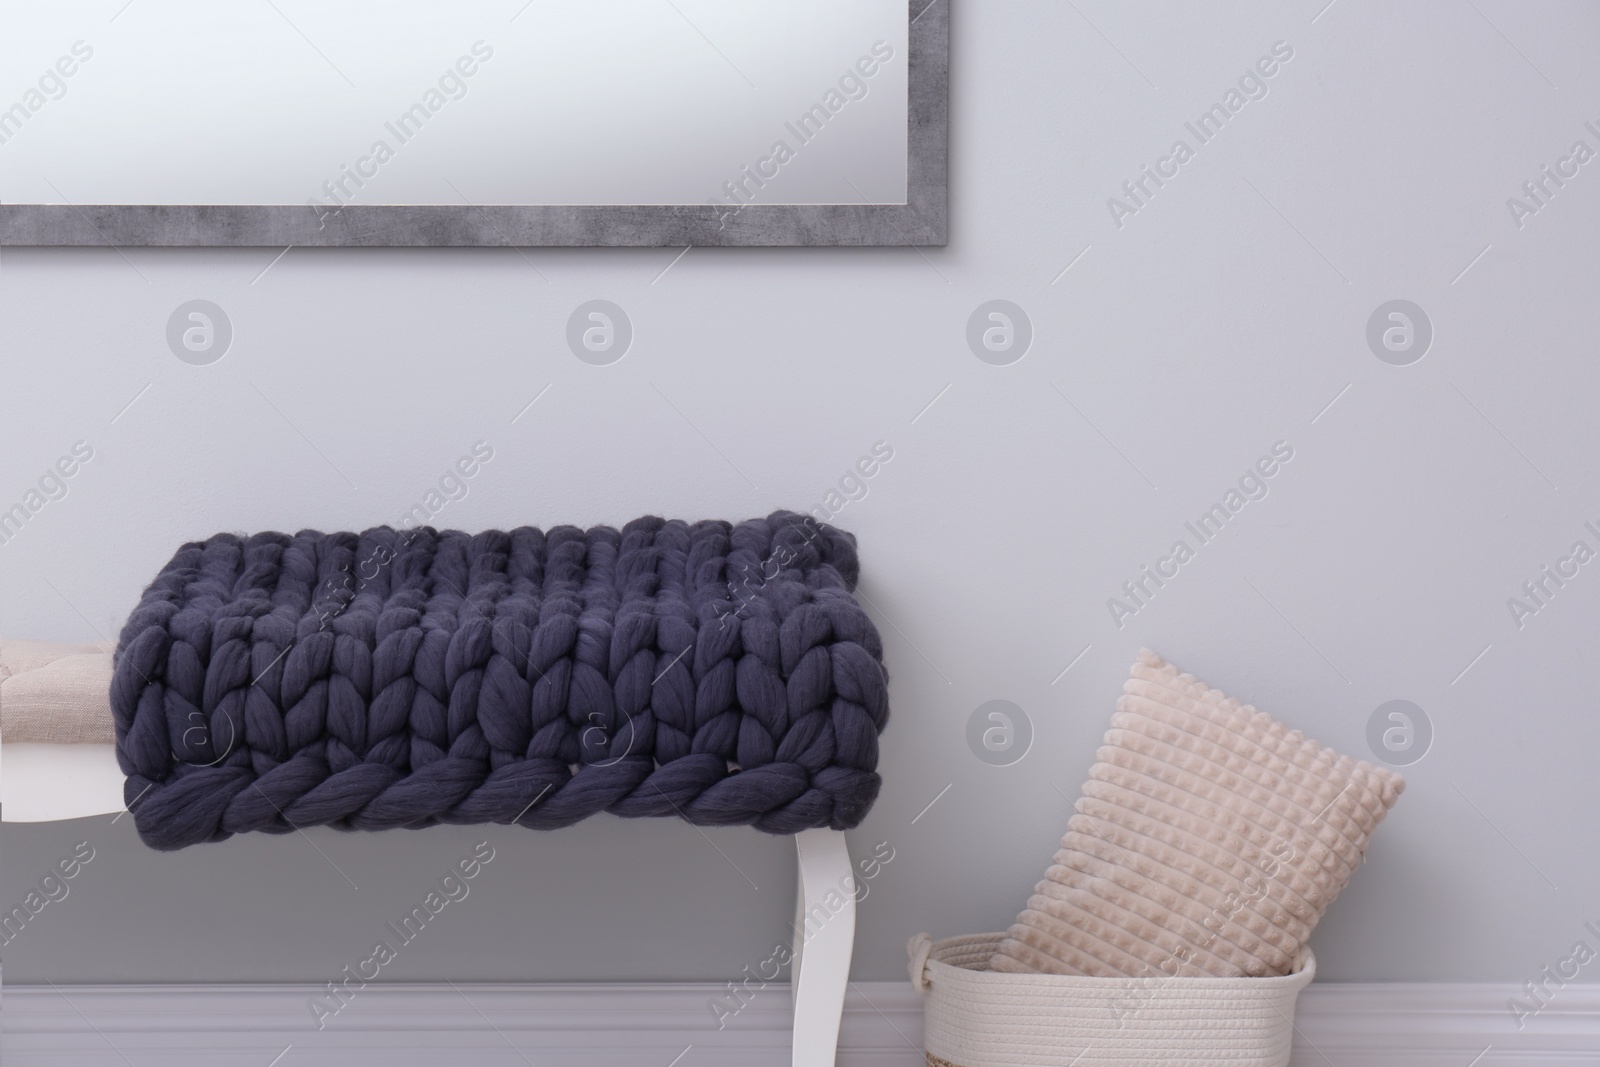 Photo of Knitted merino wool plaid on bench near grey wall